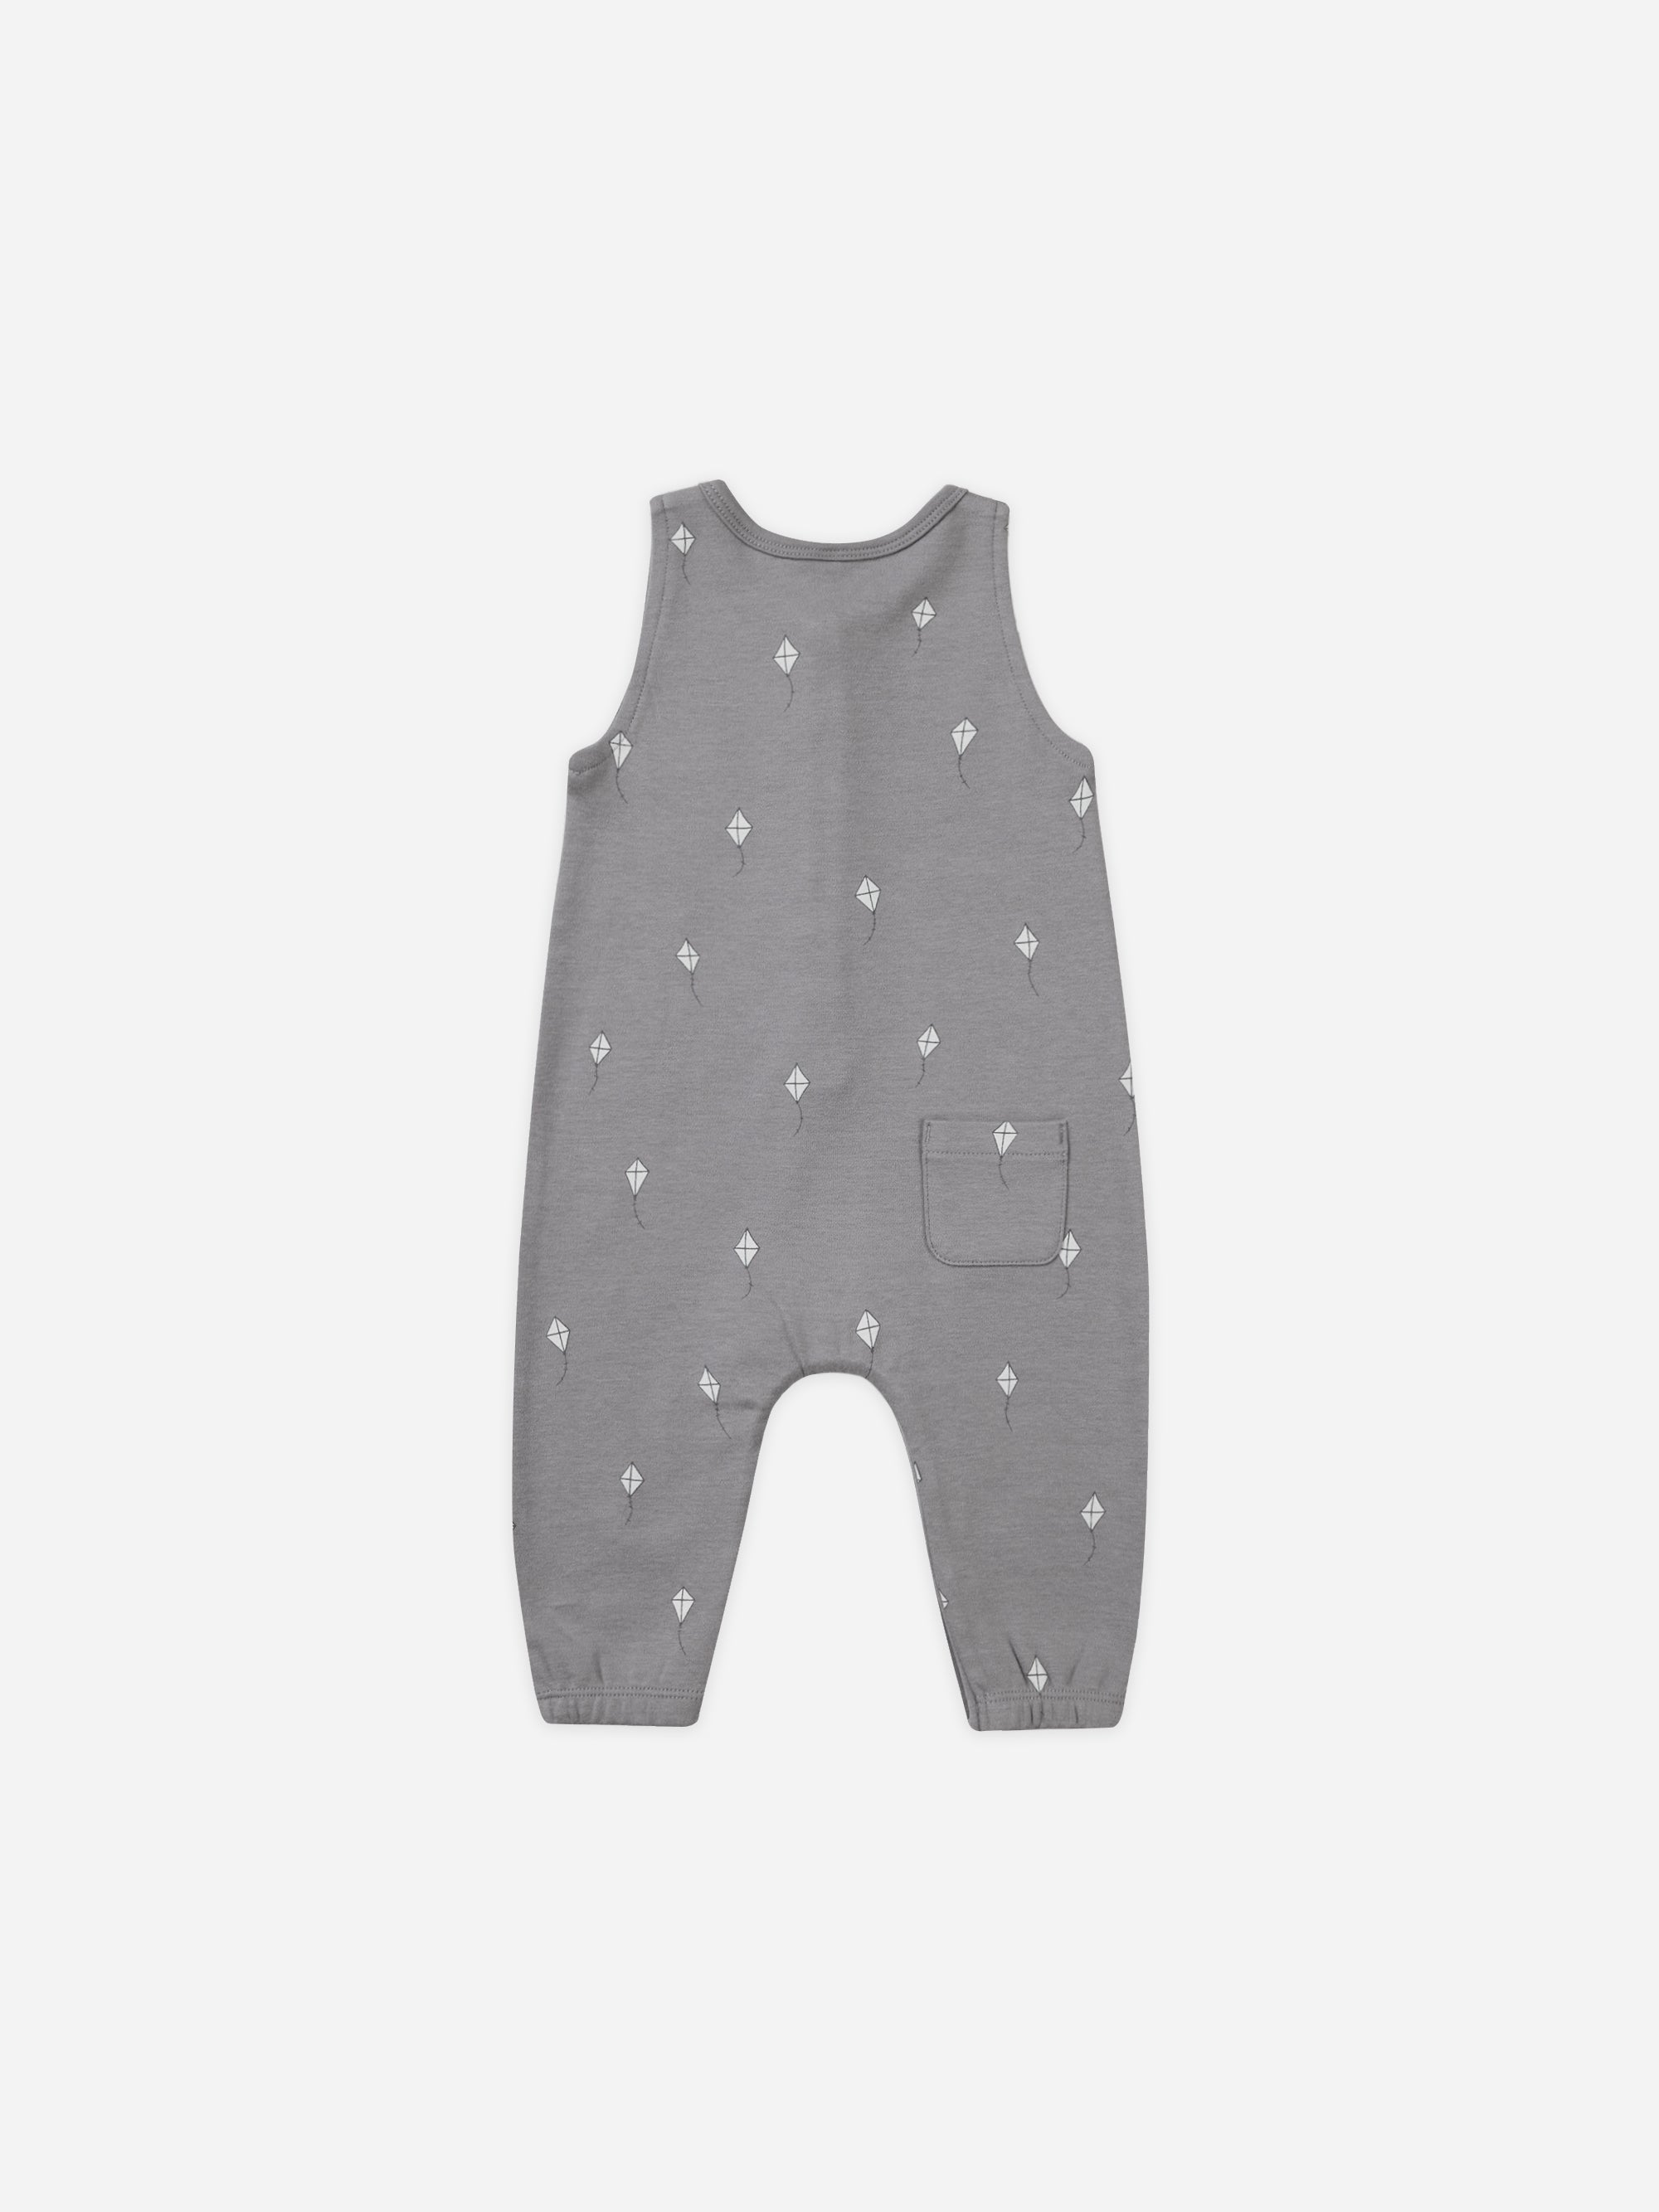 Sleeveless Jumpsuit || Kites - Rylee + Cru | Kids Clothes | Trendy Baby Clothes | Modern Infant Outfits |